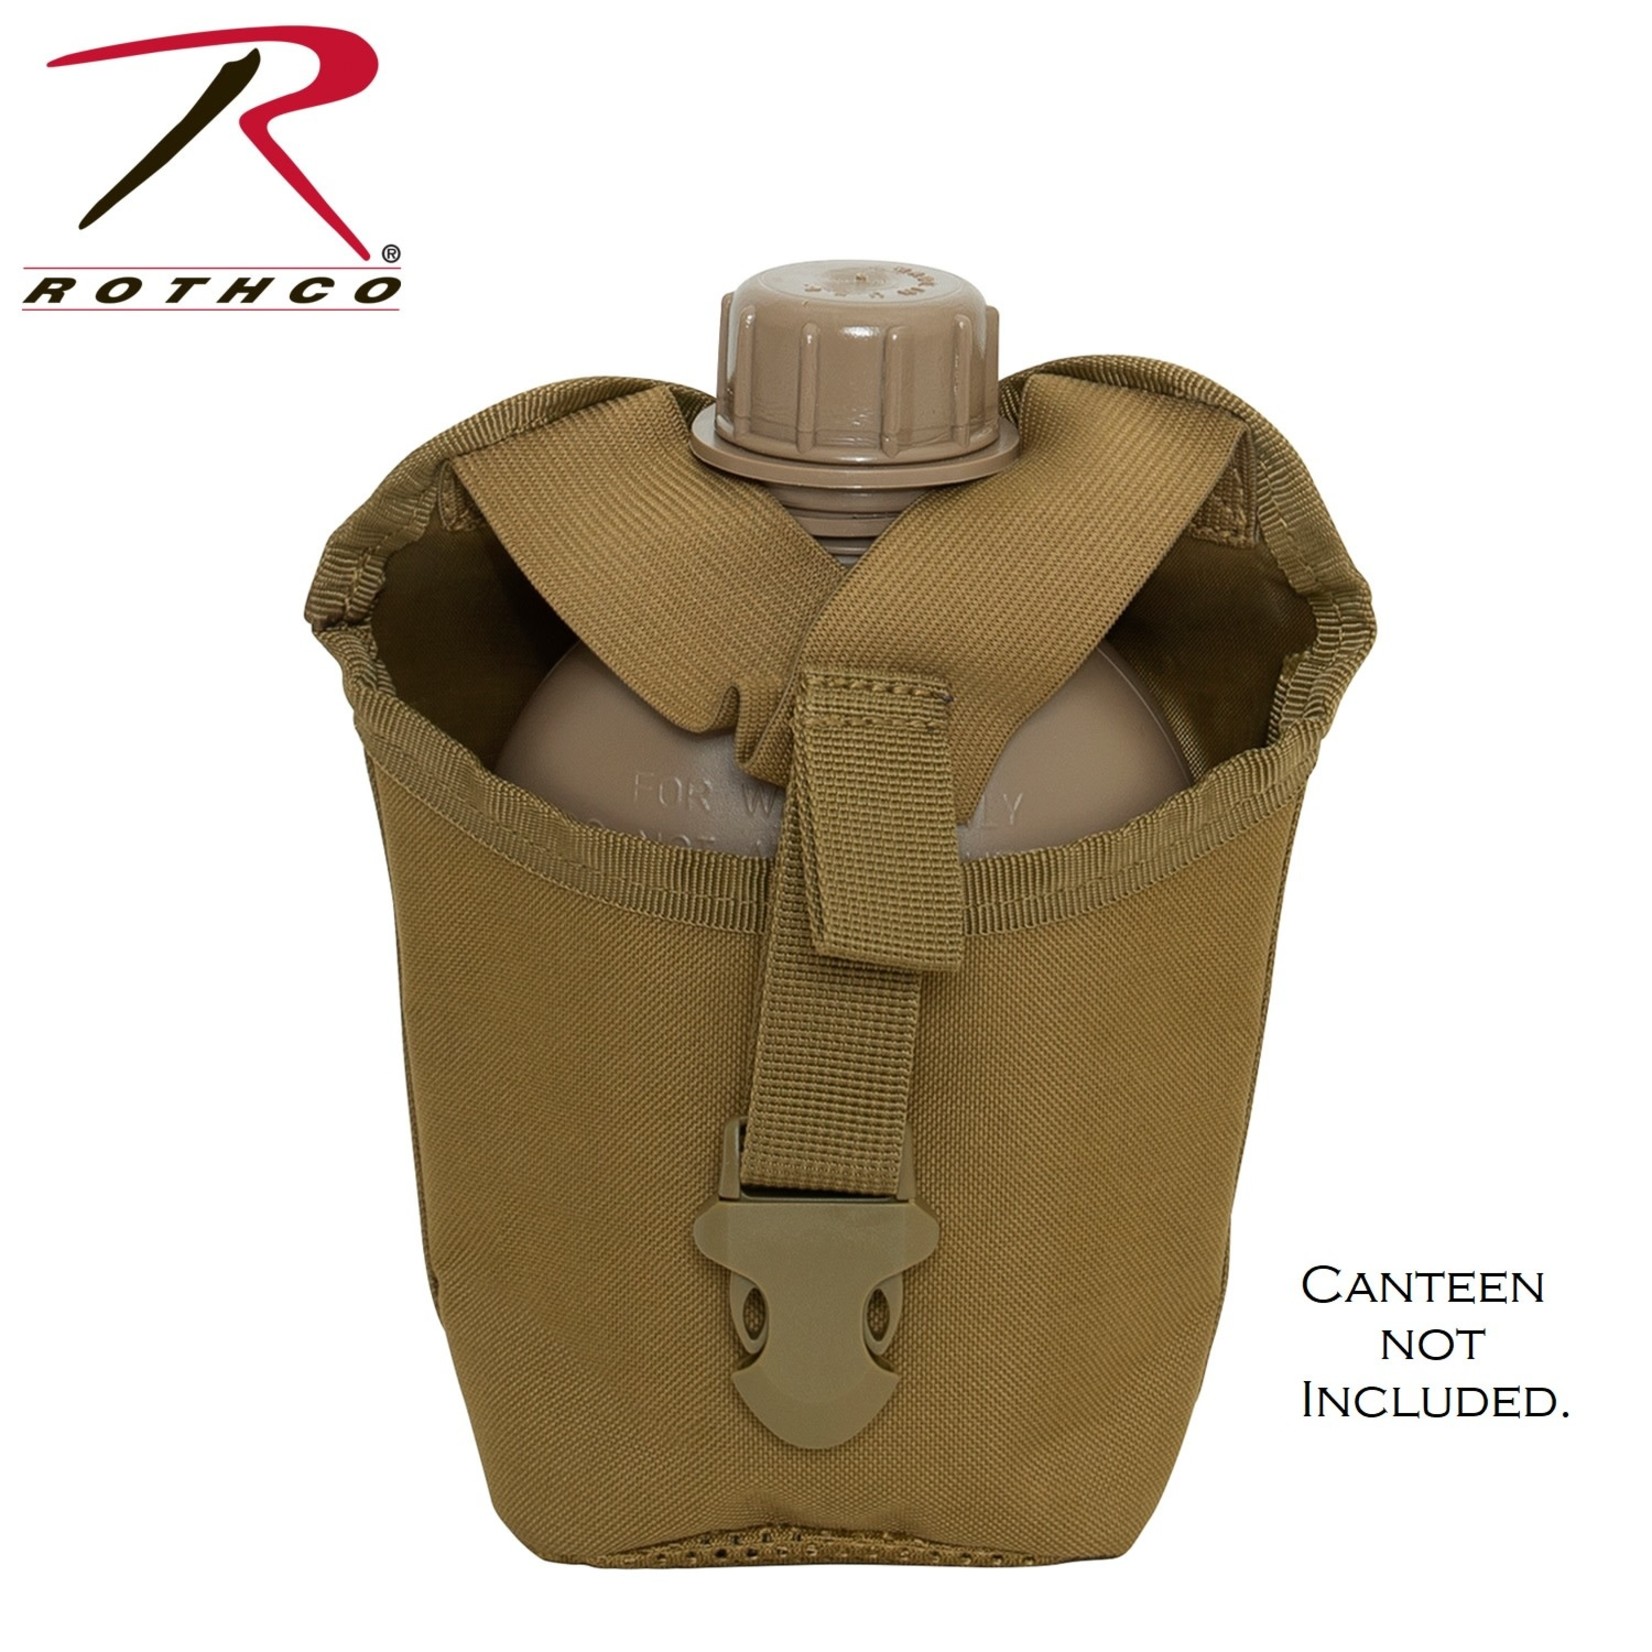 Rothco Rothco MOLLE Canteen Pouch